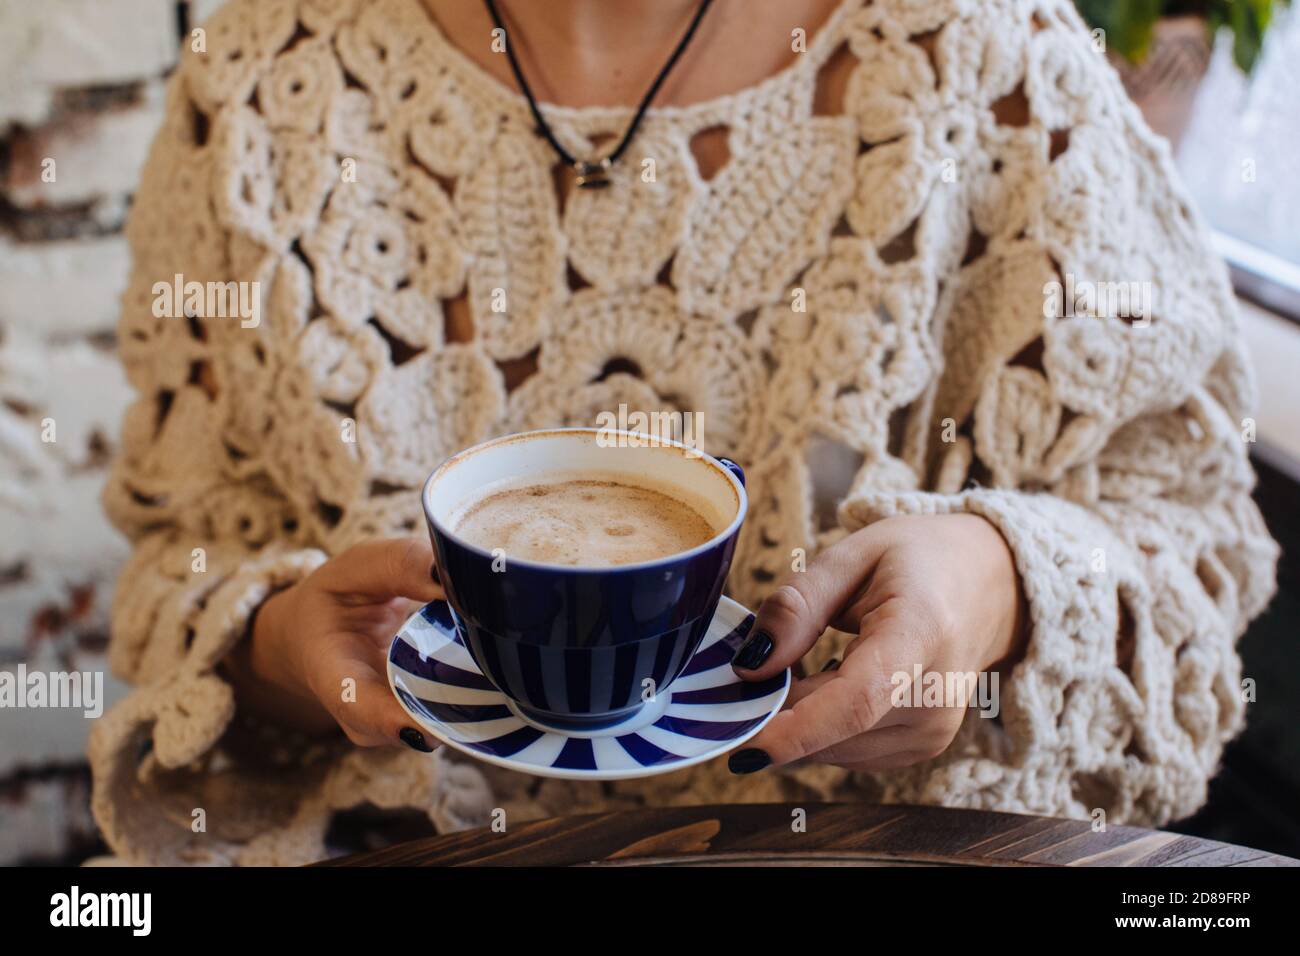 Close-up of a woman holding a cup of coffee Stock Photo